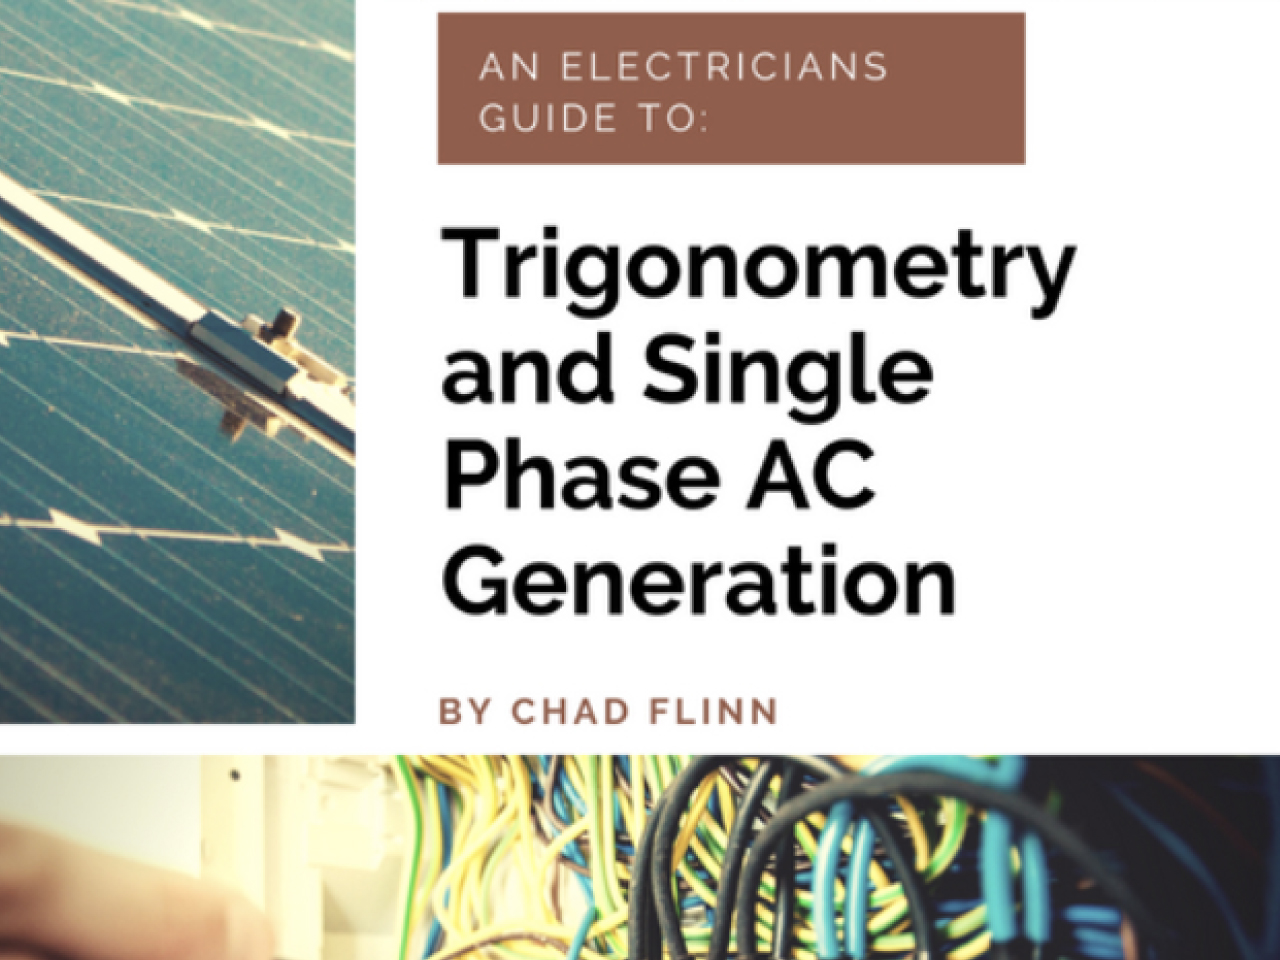 Trigonometry and single phase AC generation for electricians